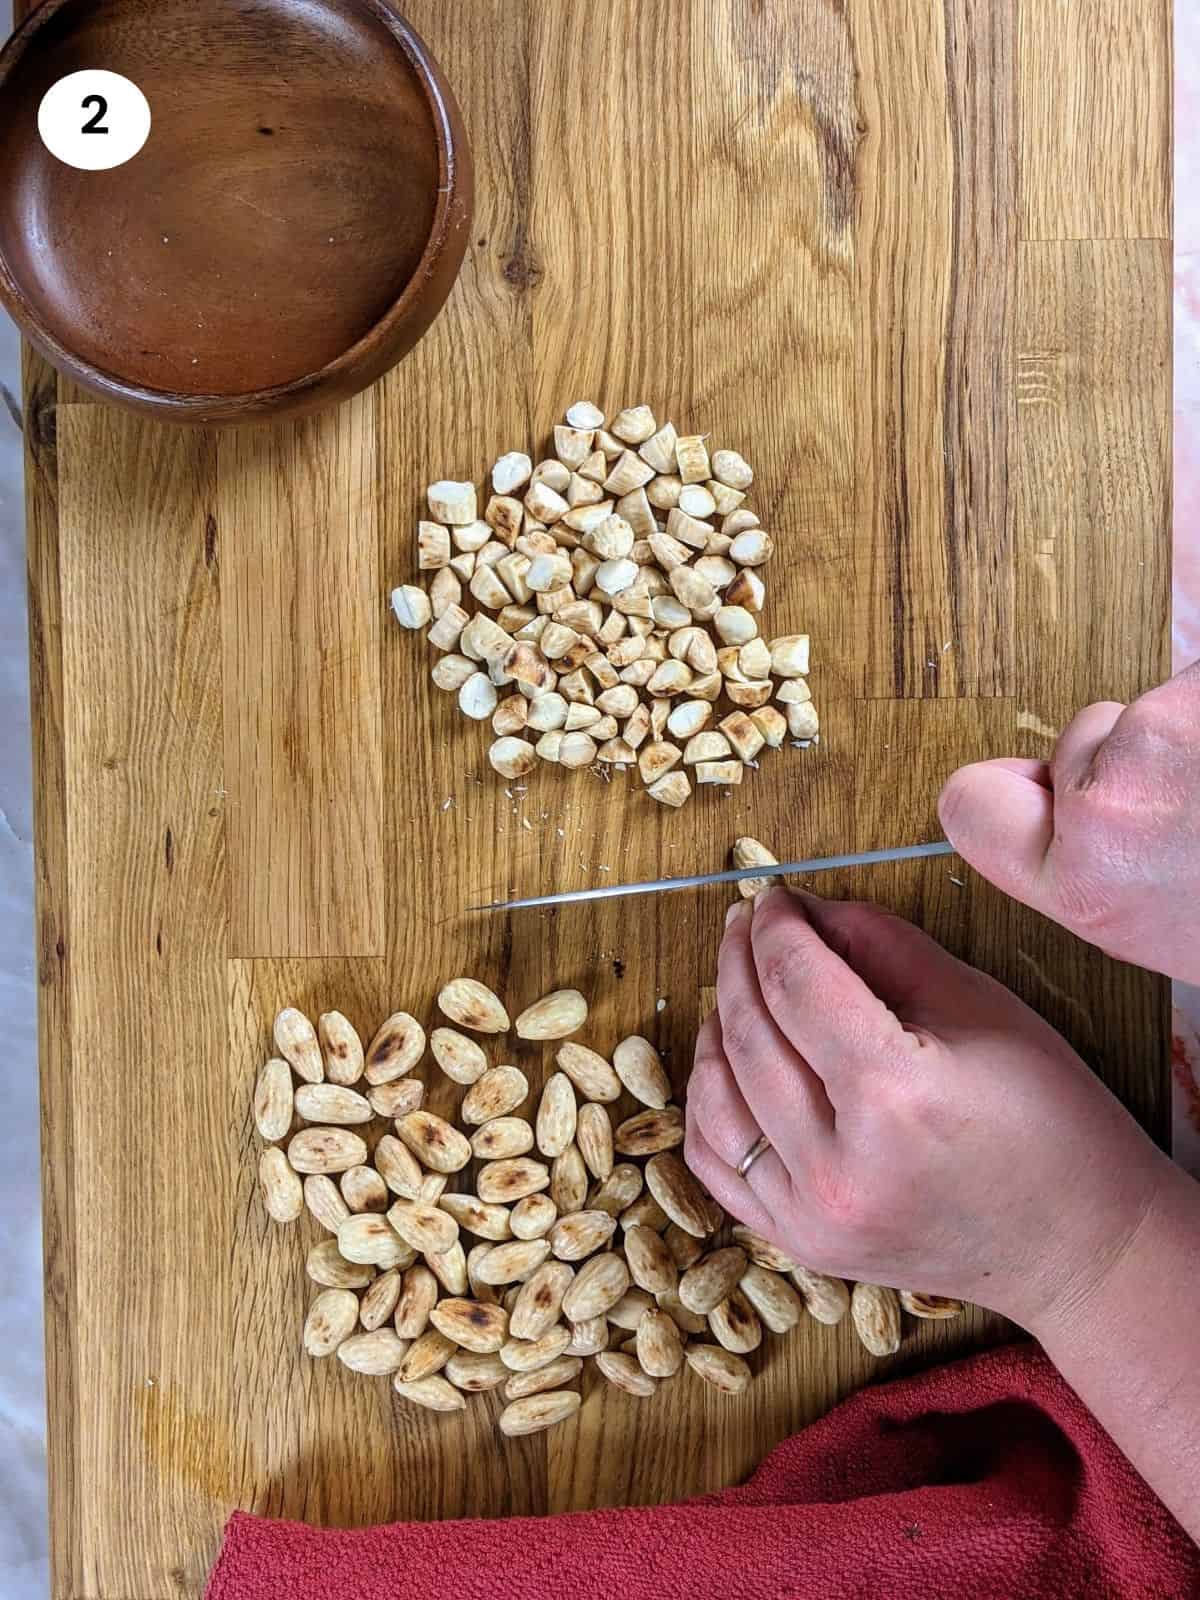 Cutting the almonds into smaller chunks